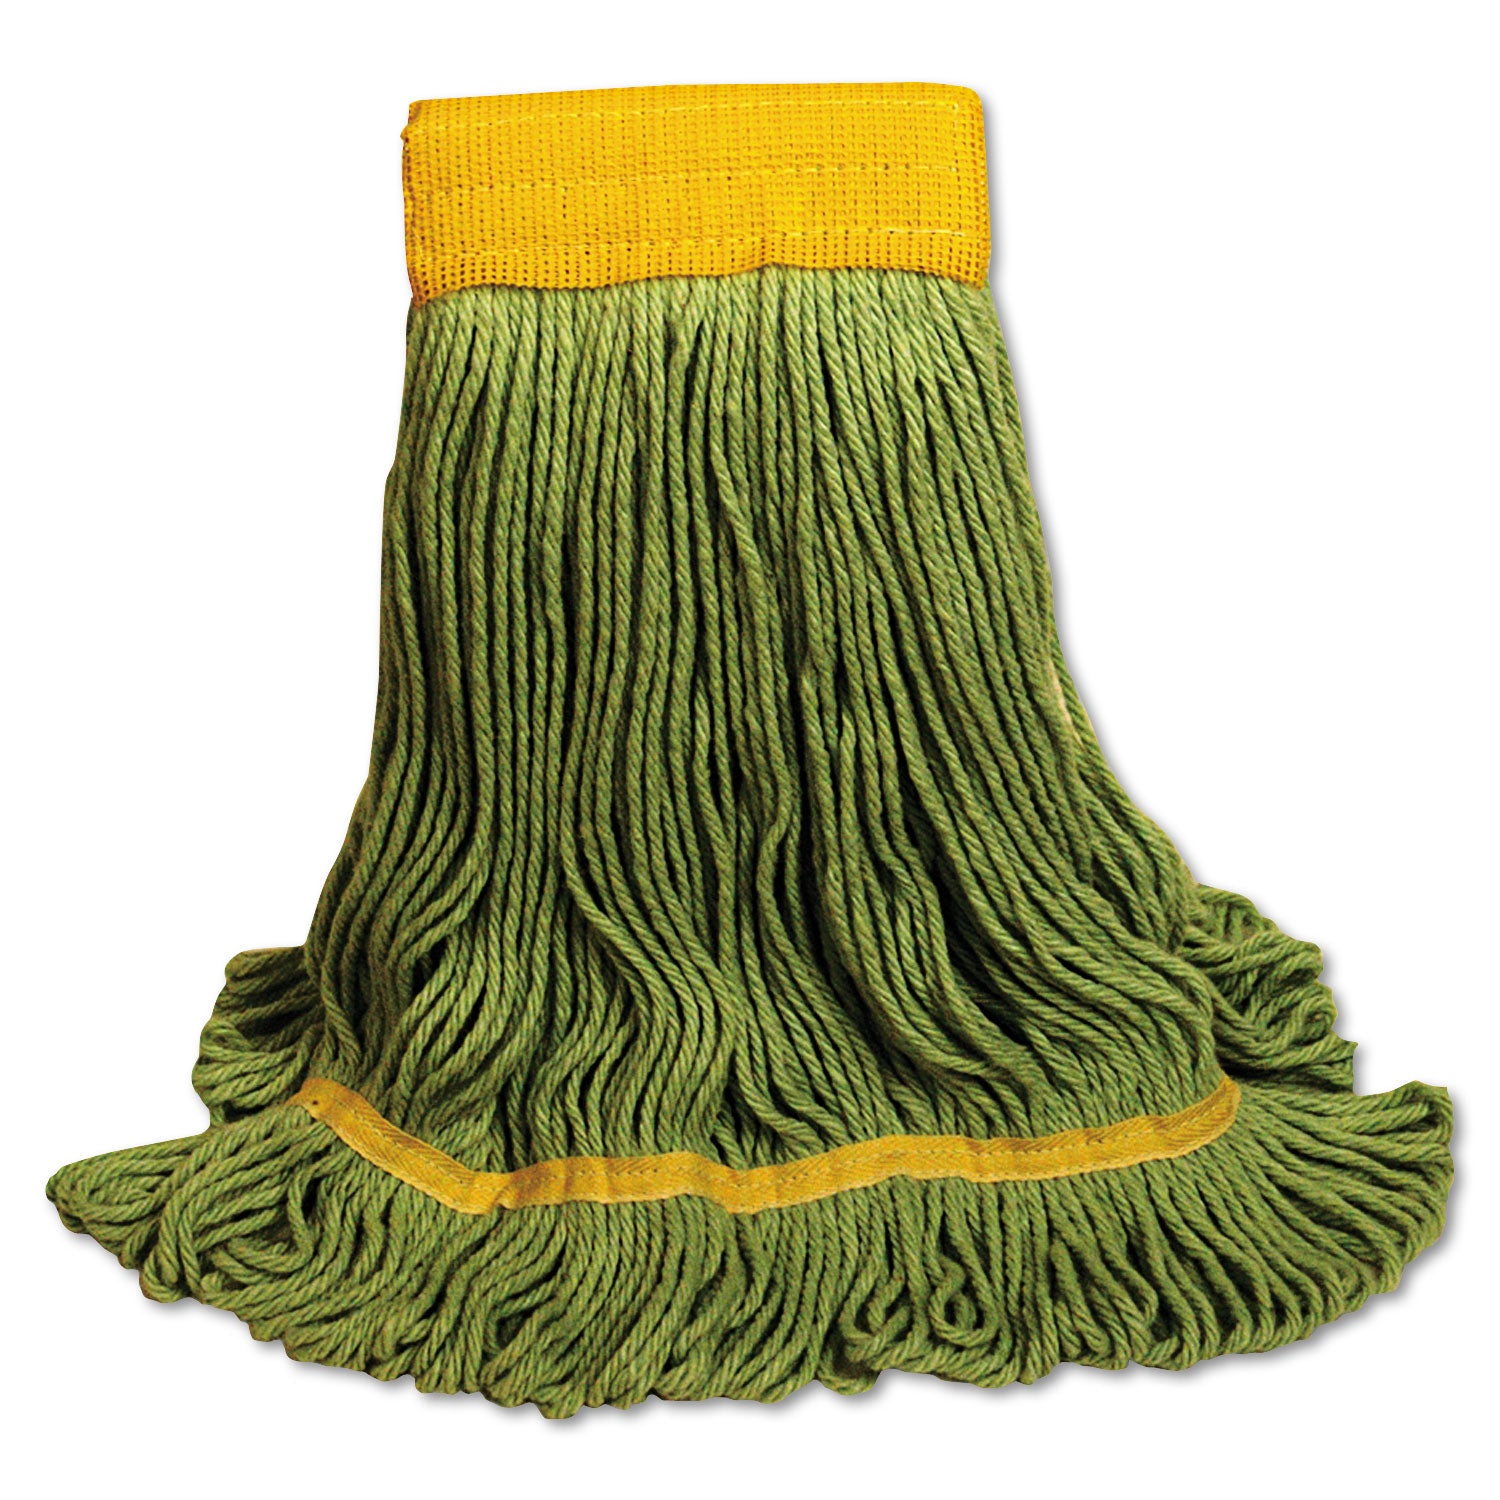 EcoMop Looped-End Mop Head, Recycled Fibers, Large Size, Green - 